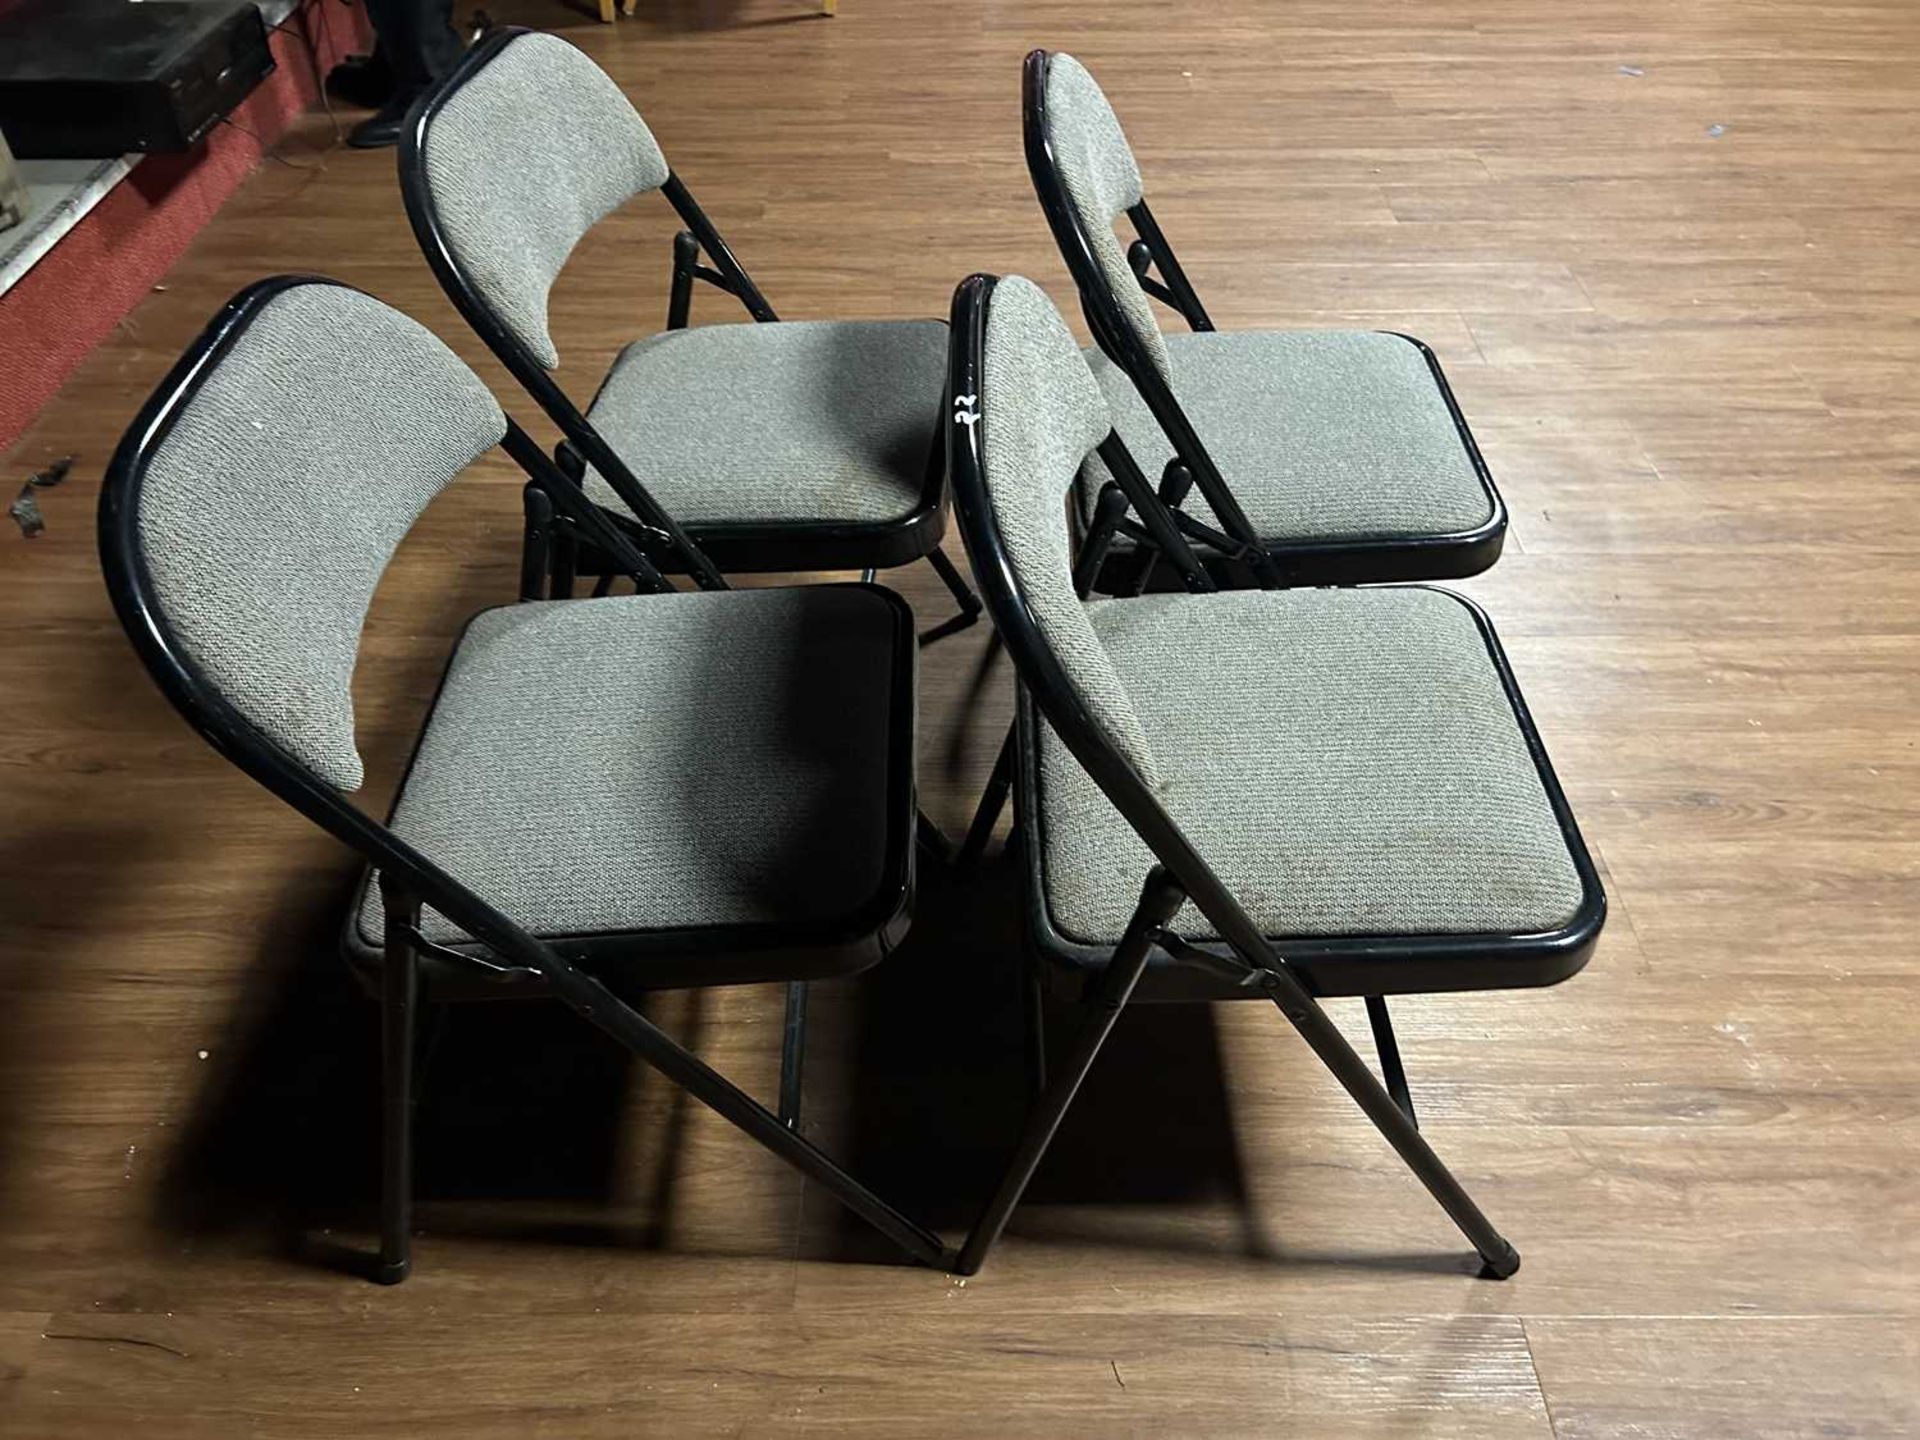 4 metal framed folding chairs - Image 2 of 2